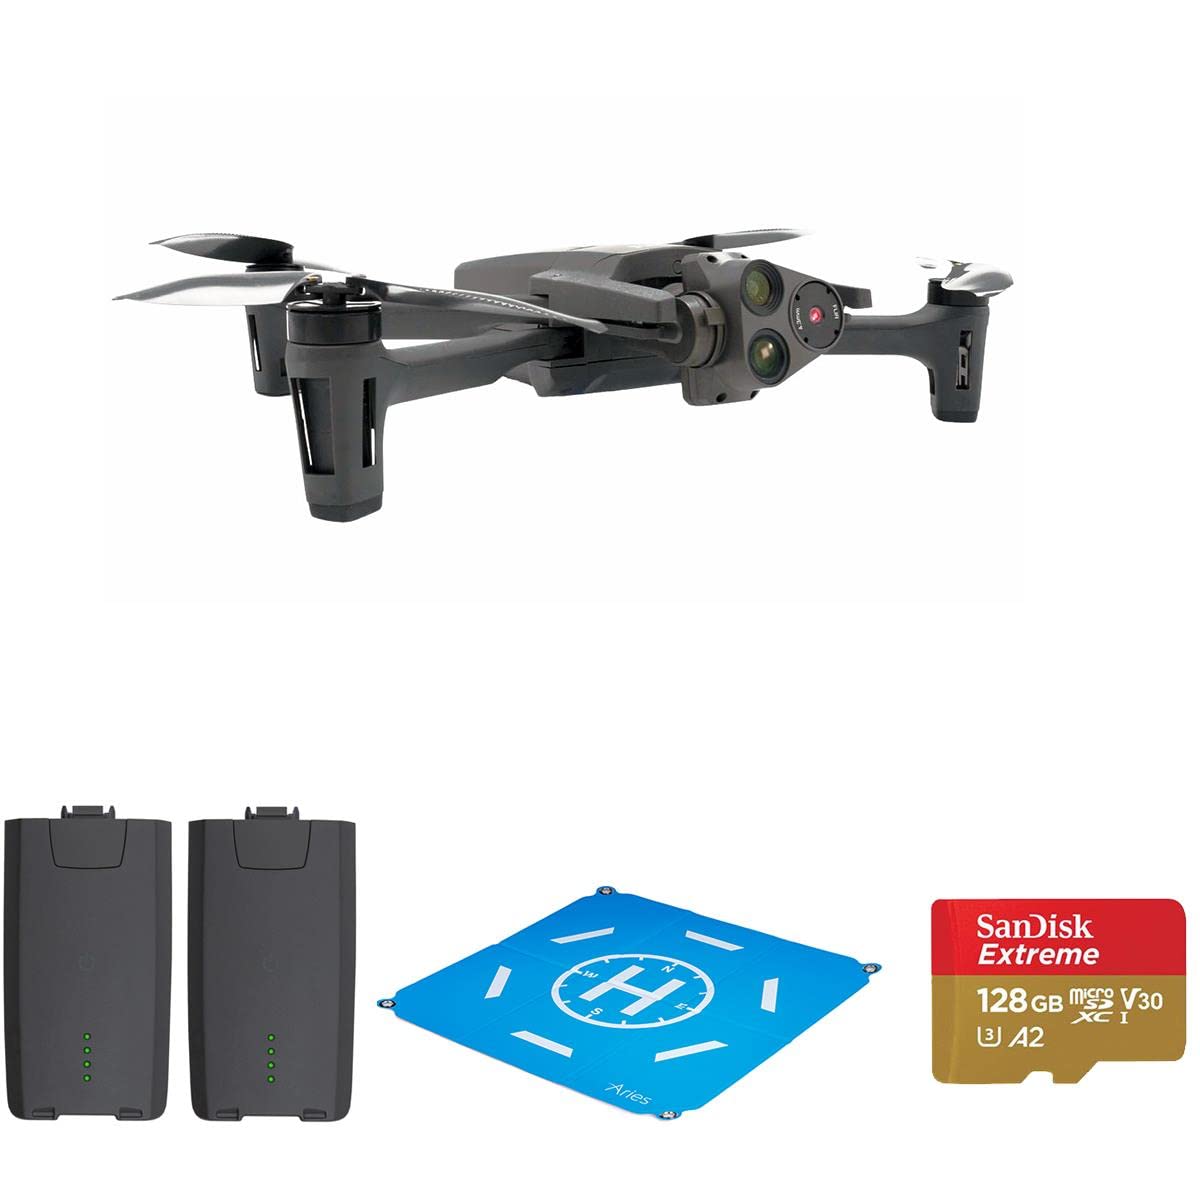 Parrot ANAFI USA Thermal Drone Bundle with Spare Batteries, 128GB microSD Memory Card, Landing Pad